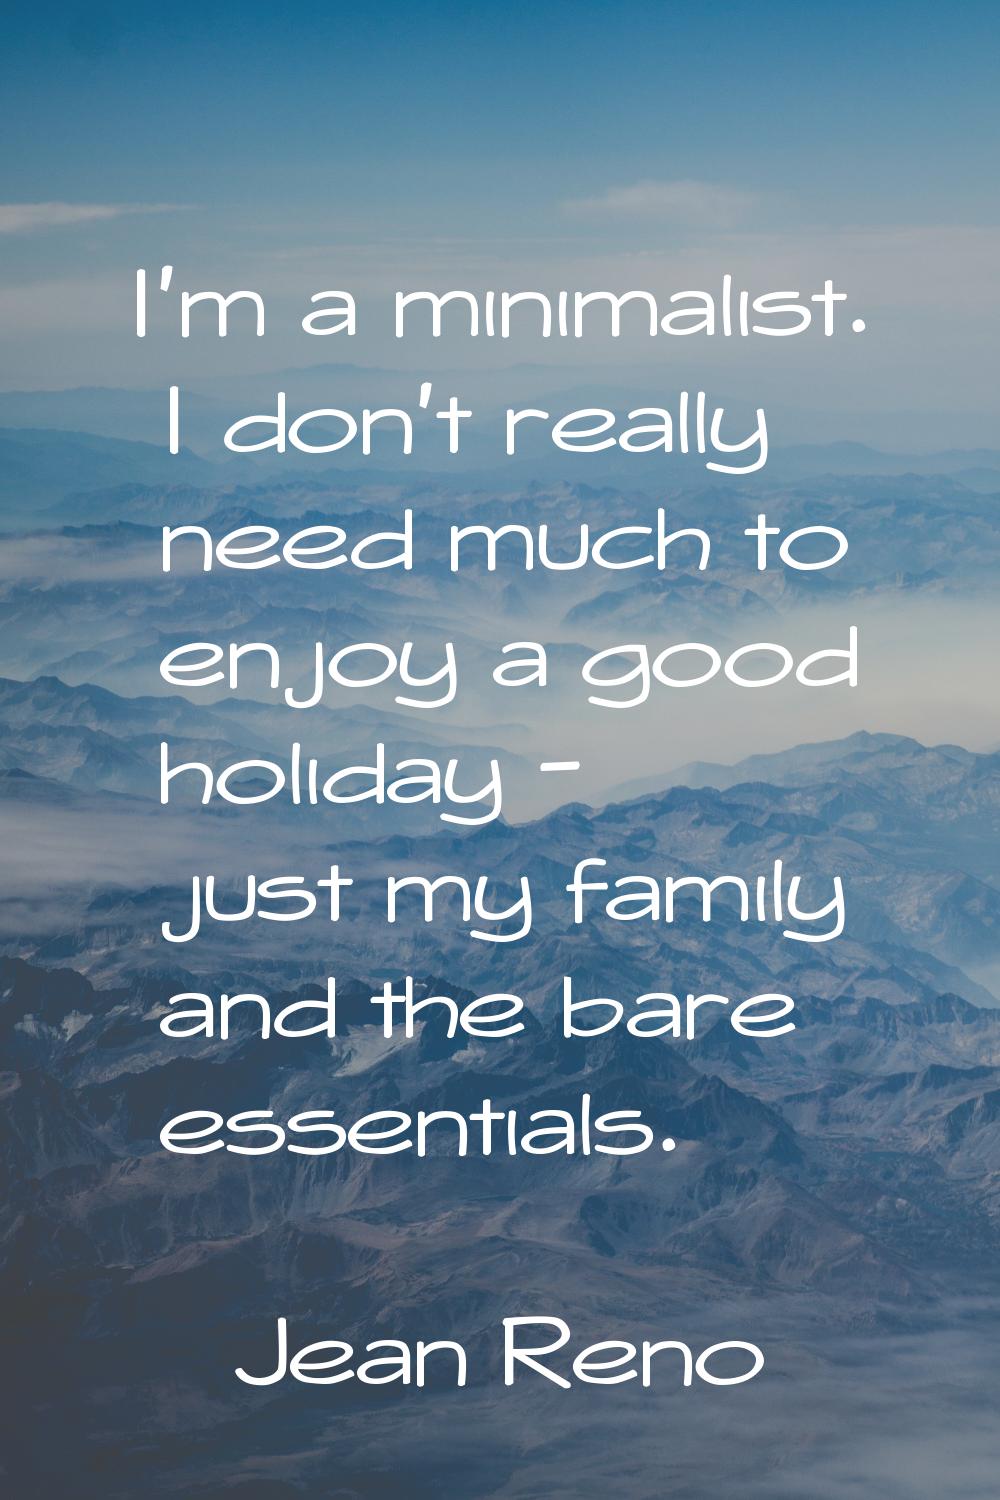 I'm a minimalist. I don't really need much to enjoy a good holiday - just my family and the bare es